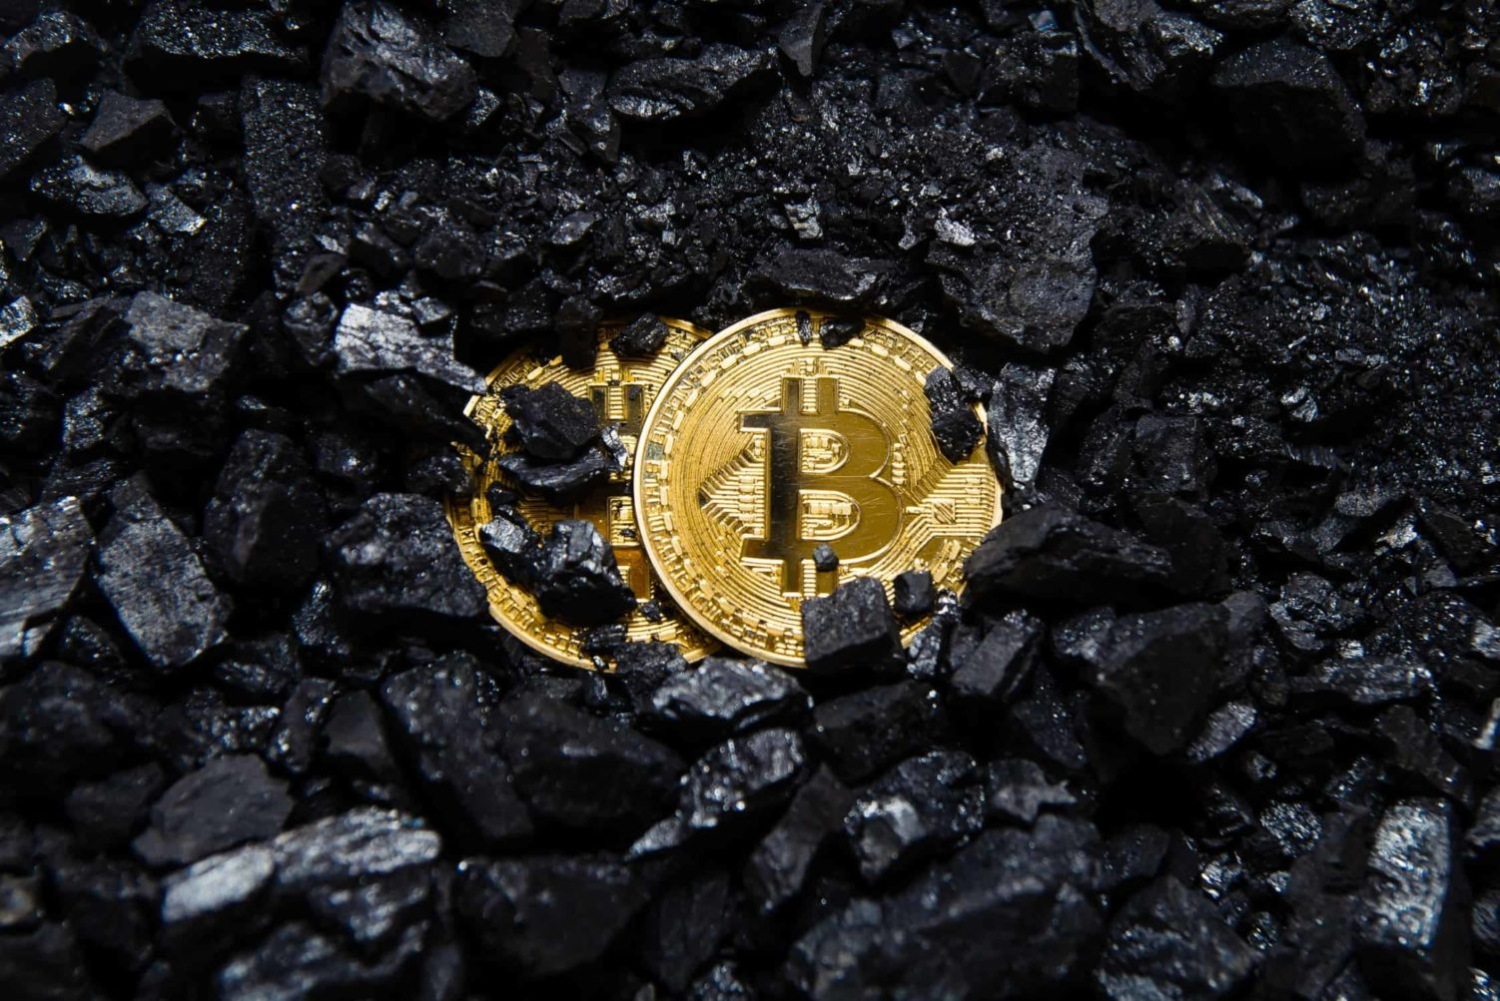 University of New Mexico Researchers Find Bitcoin Mining Is Environmentally Unsustainable